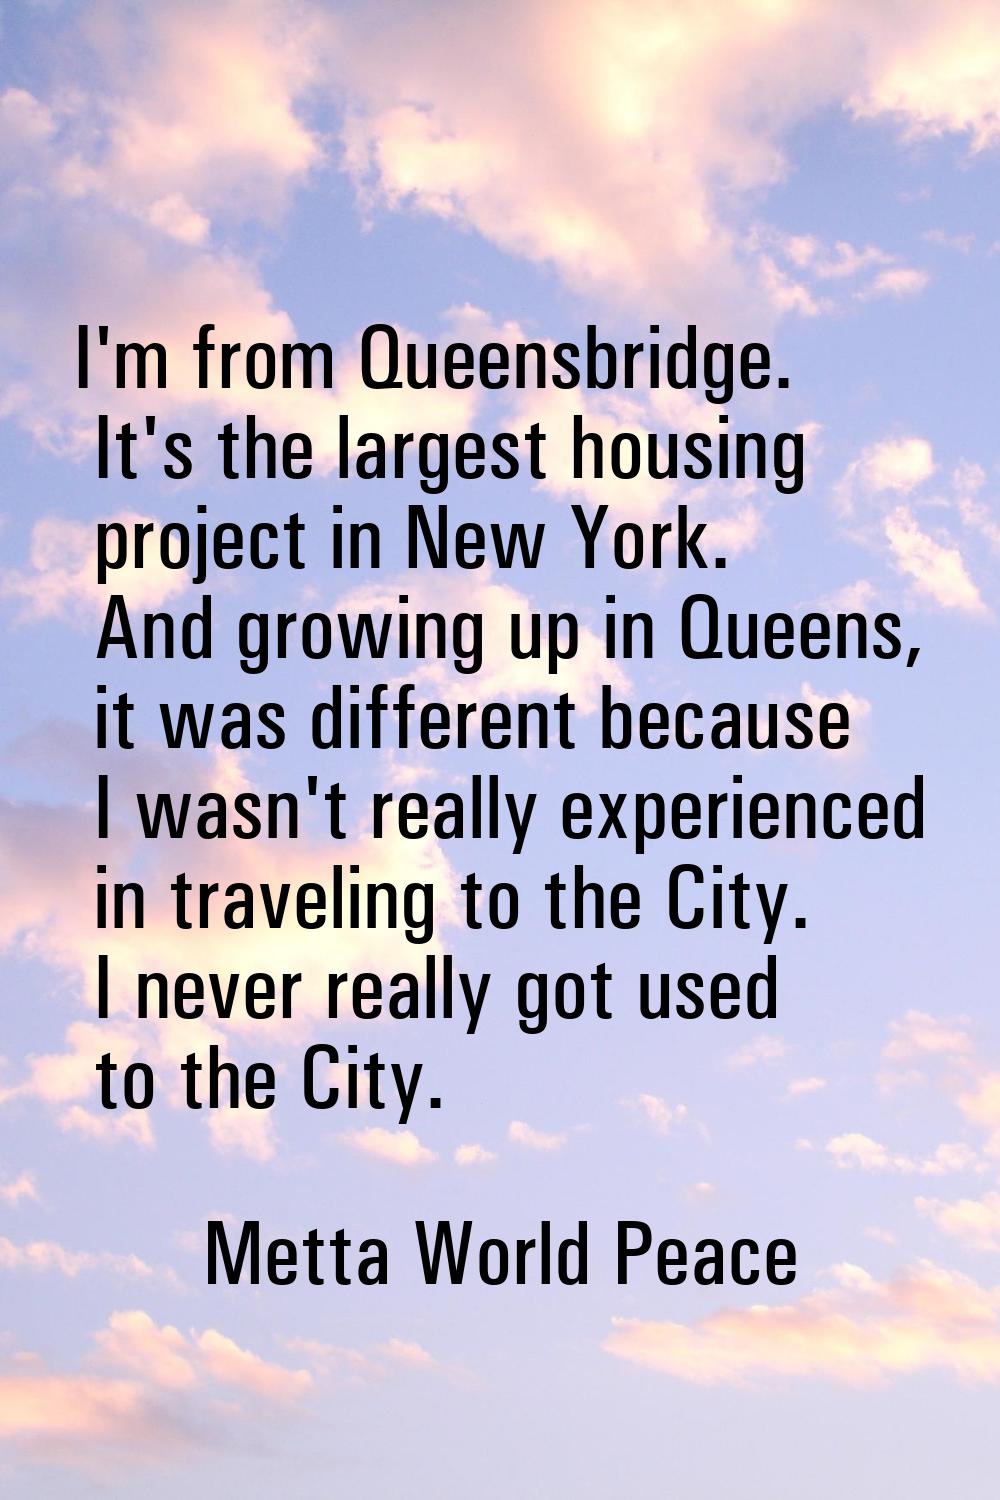 I'm from Queensbridge. It's the largest housing project in New York. And growing up in Queens, it w